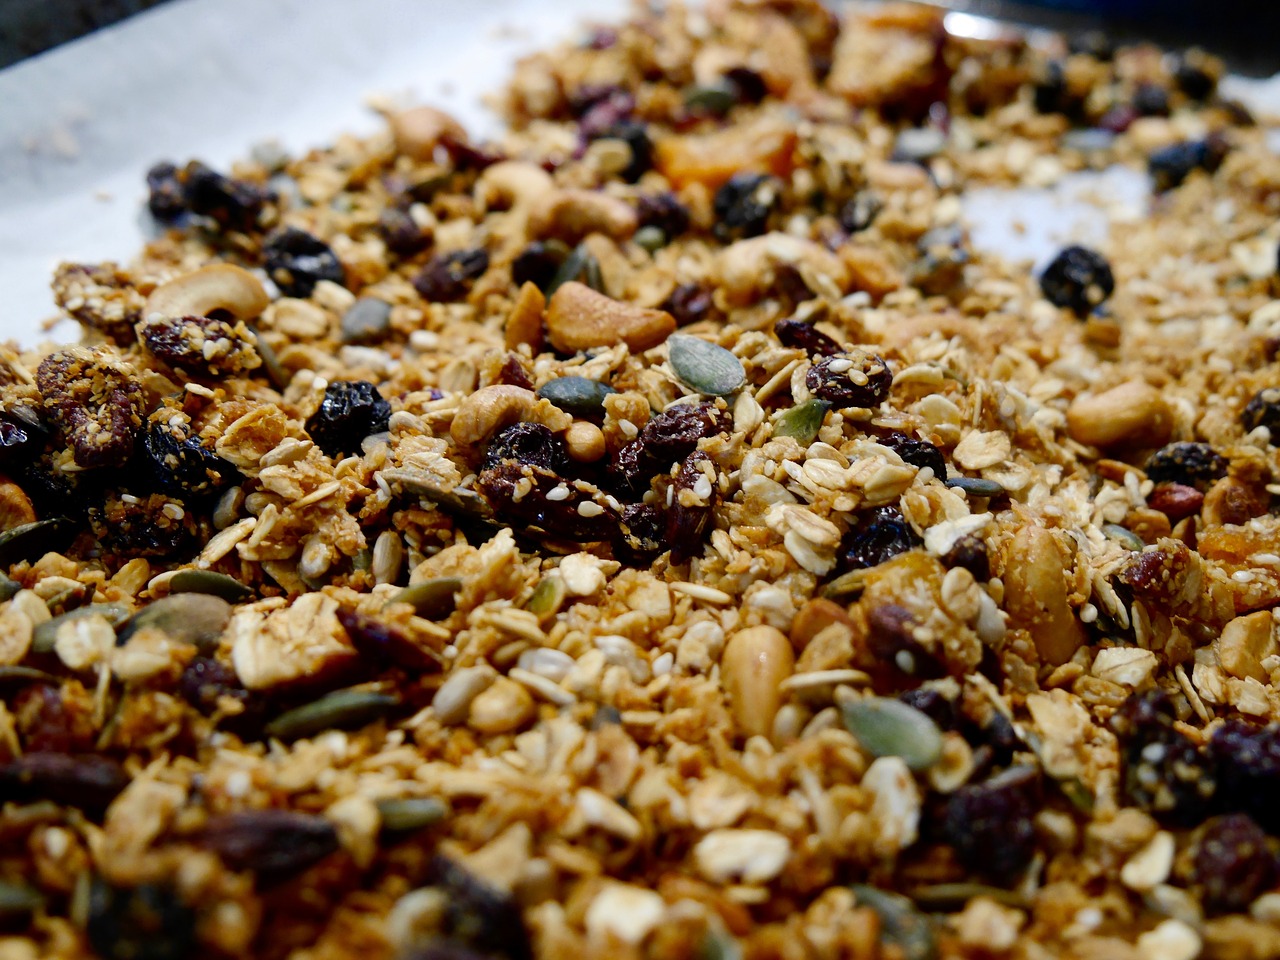 Low Fat Granola with Sun-Dried Fruit and Almonds